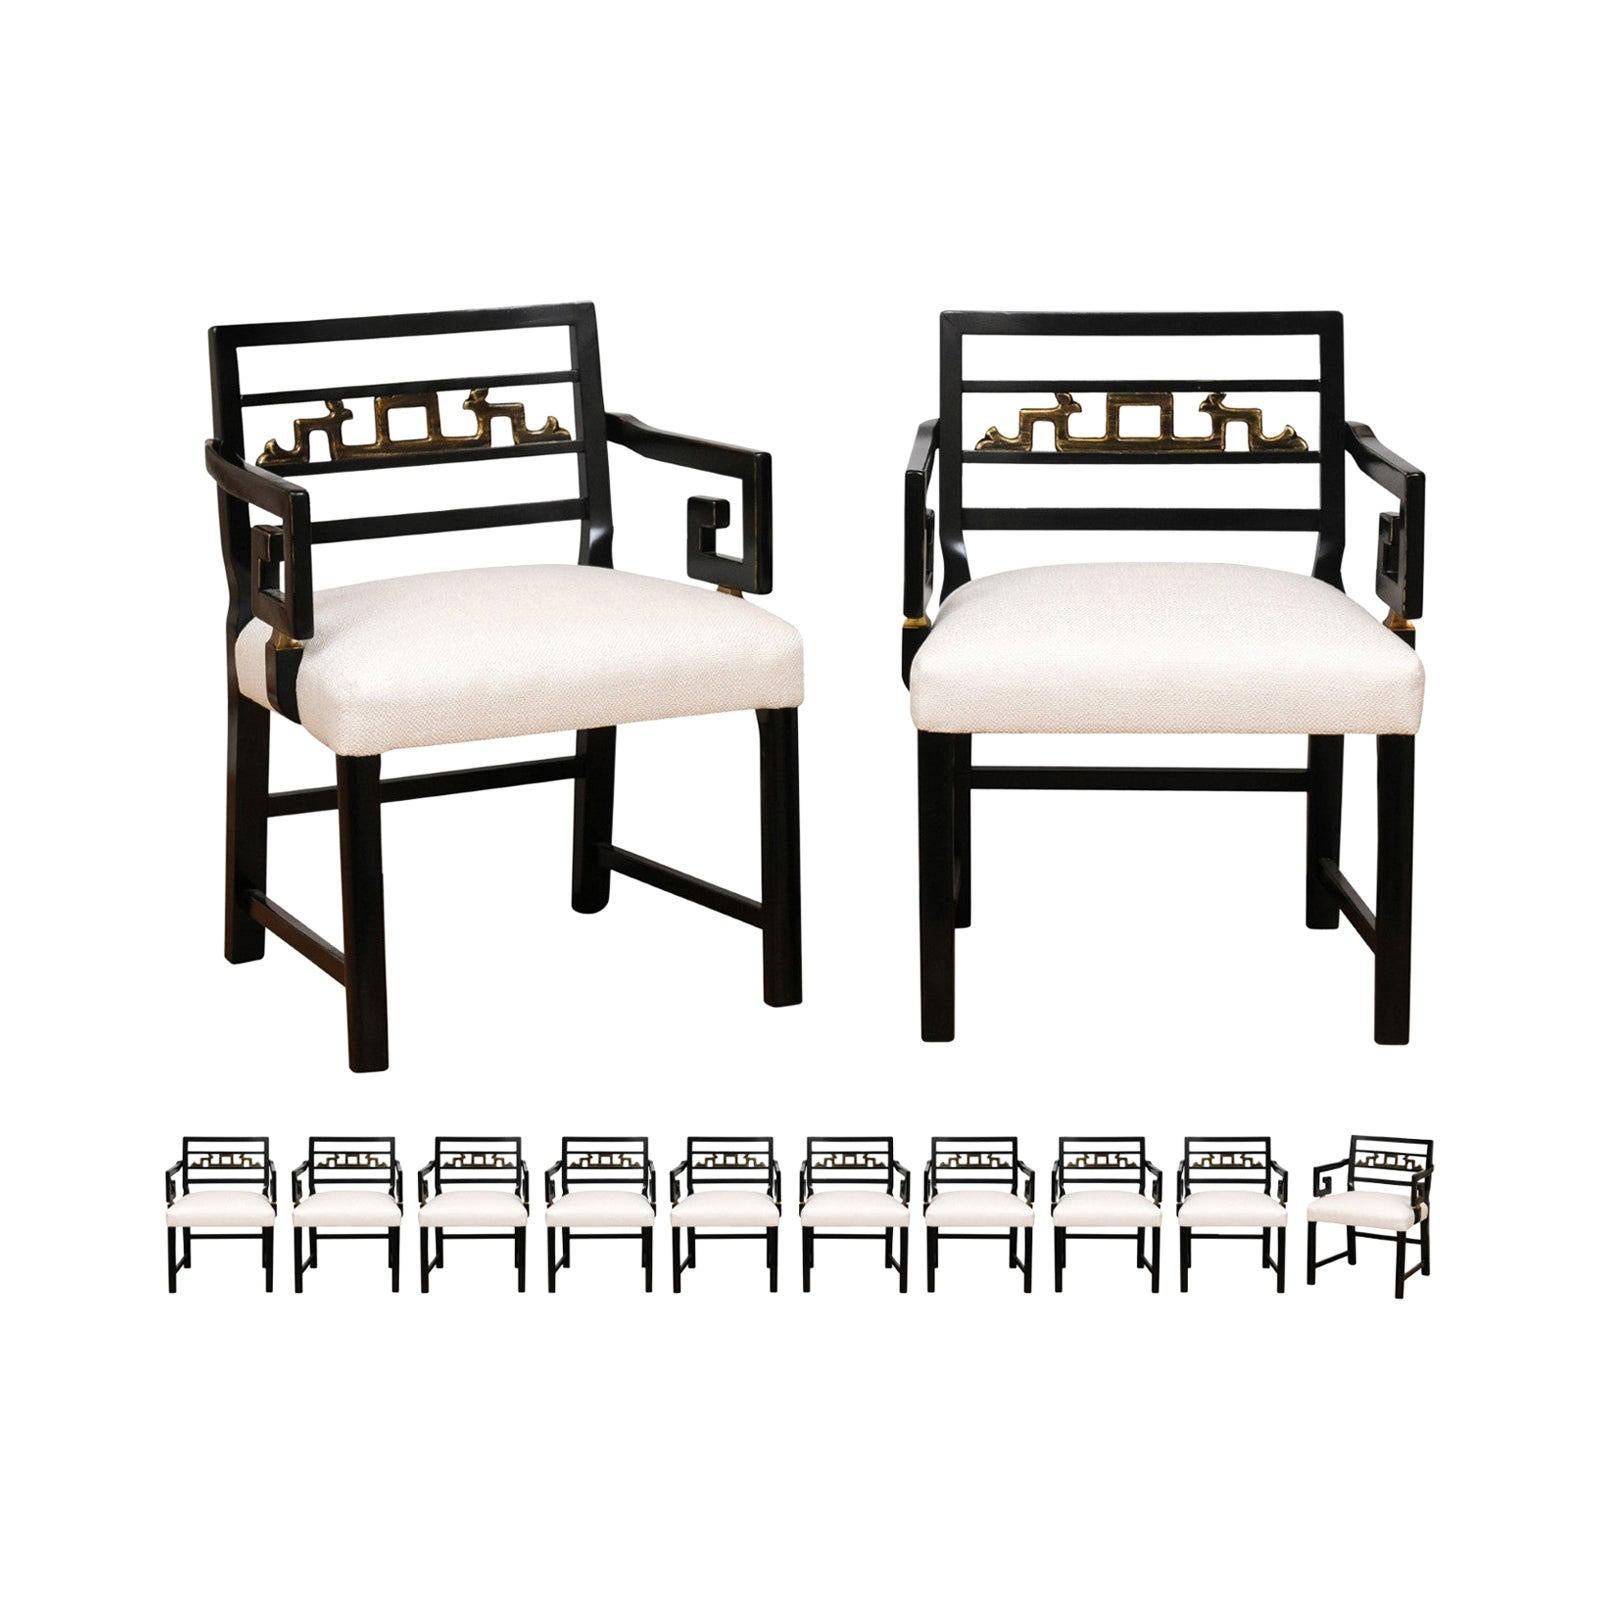 Exquisite Set of 12 Chinoiserie Greek Key Armchairs by Baker, circa 1960 For Sale